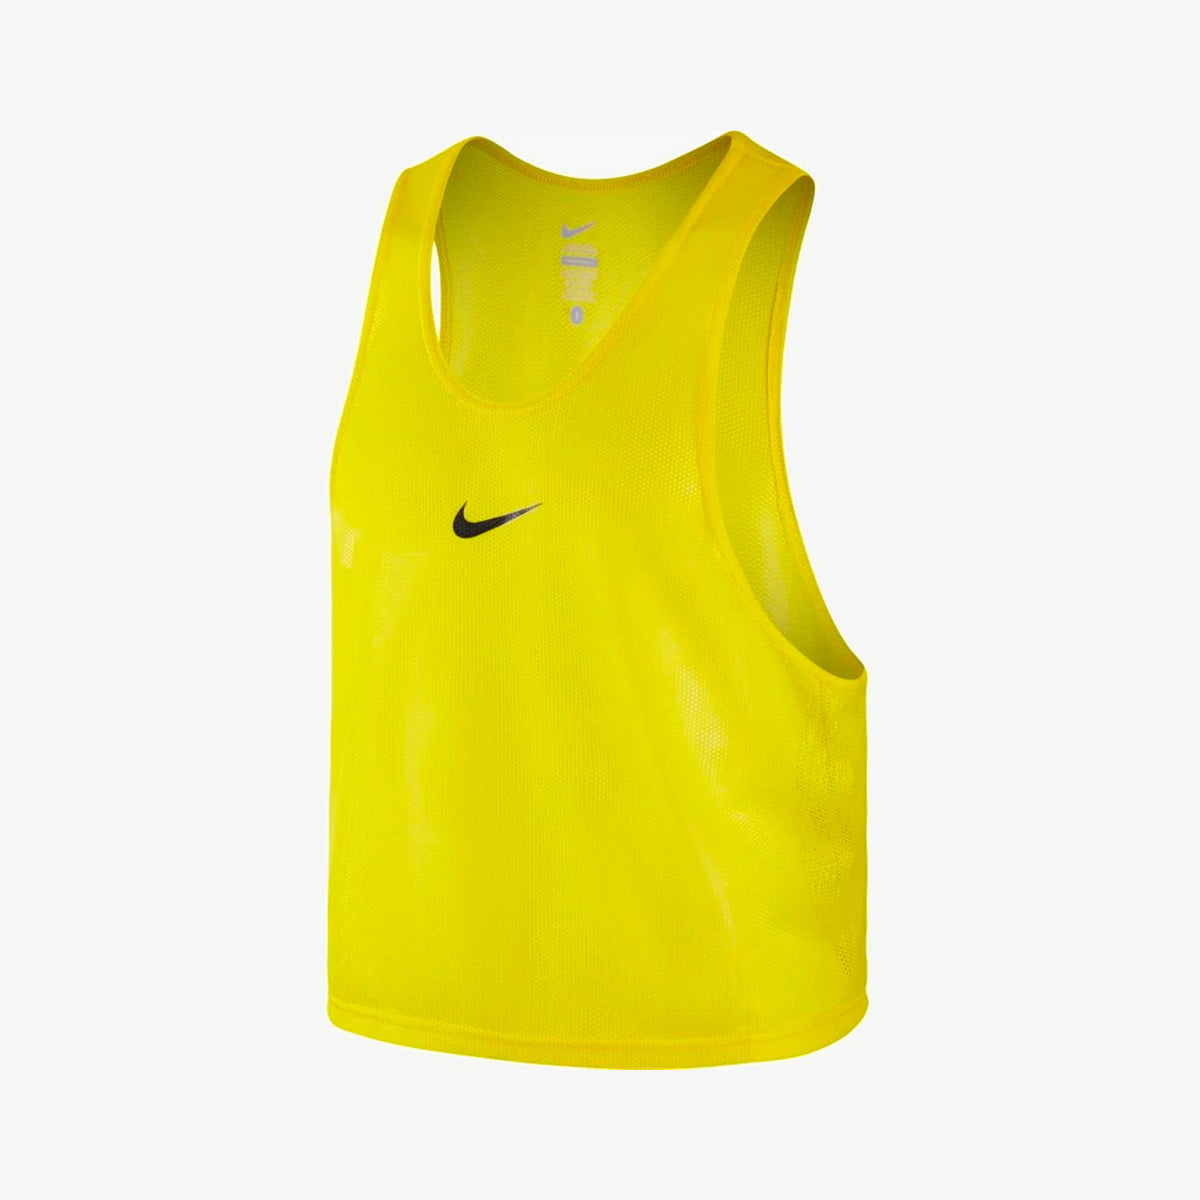 Adult Scrimmage Vest Yellow - Niky's Sports